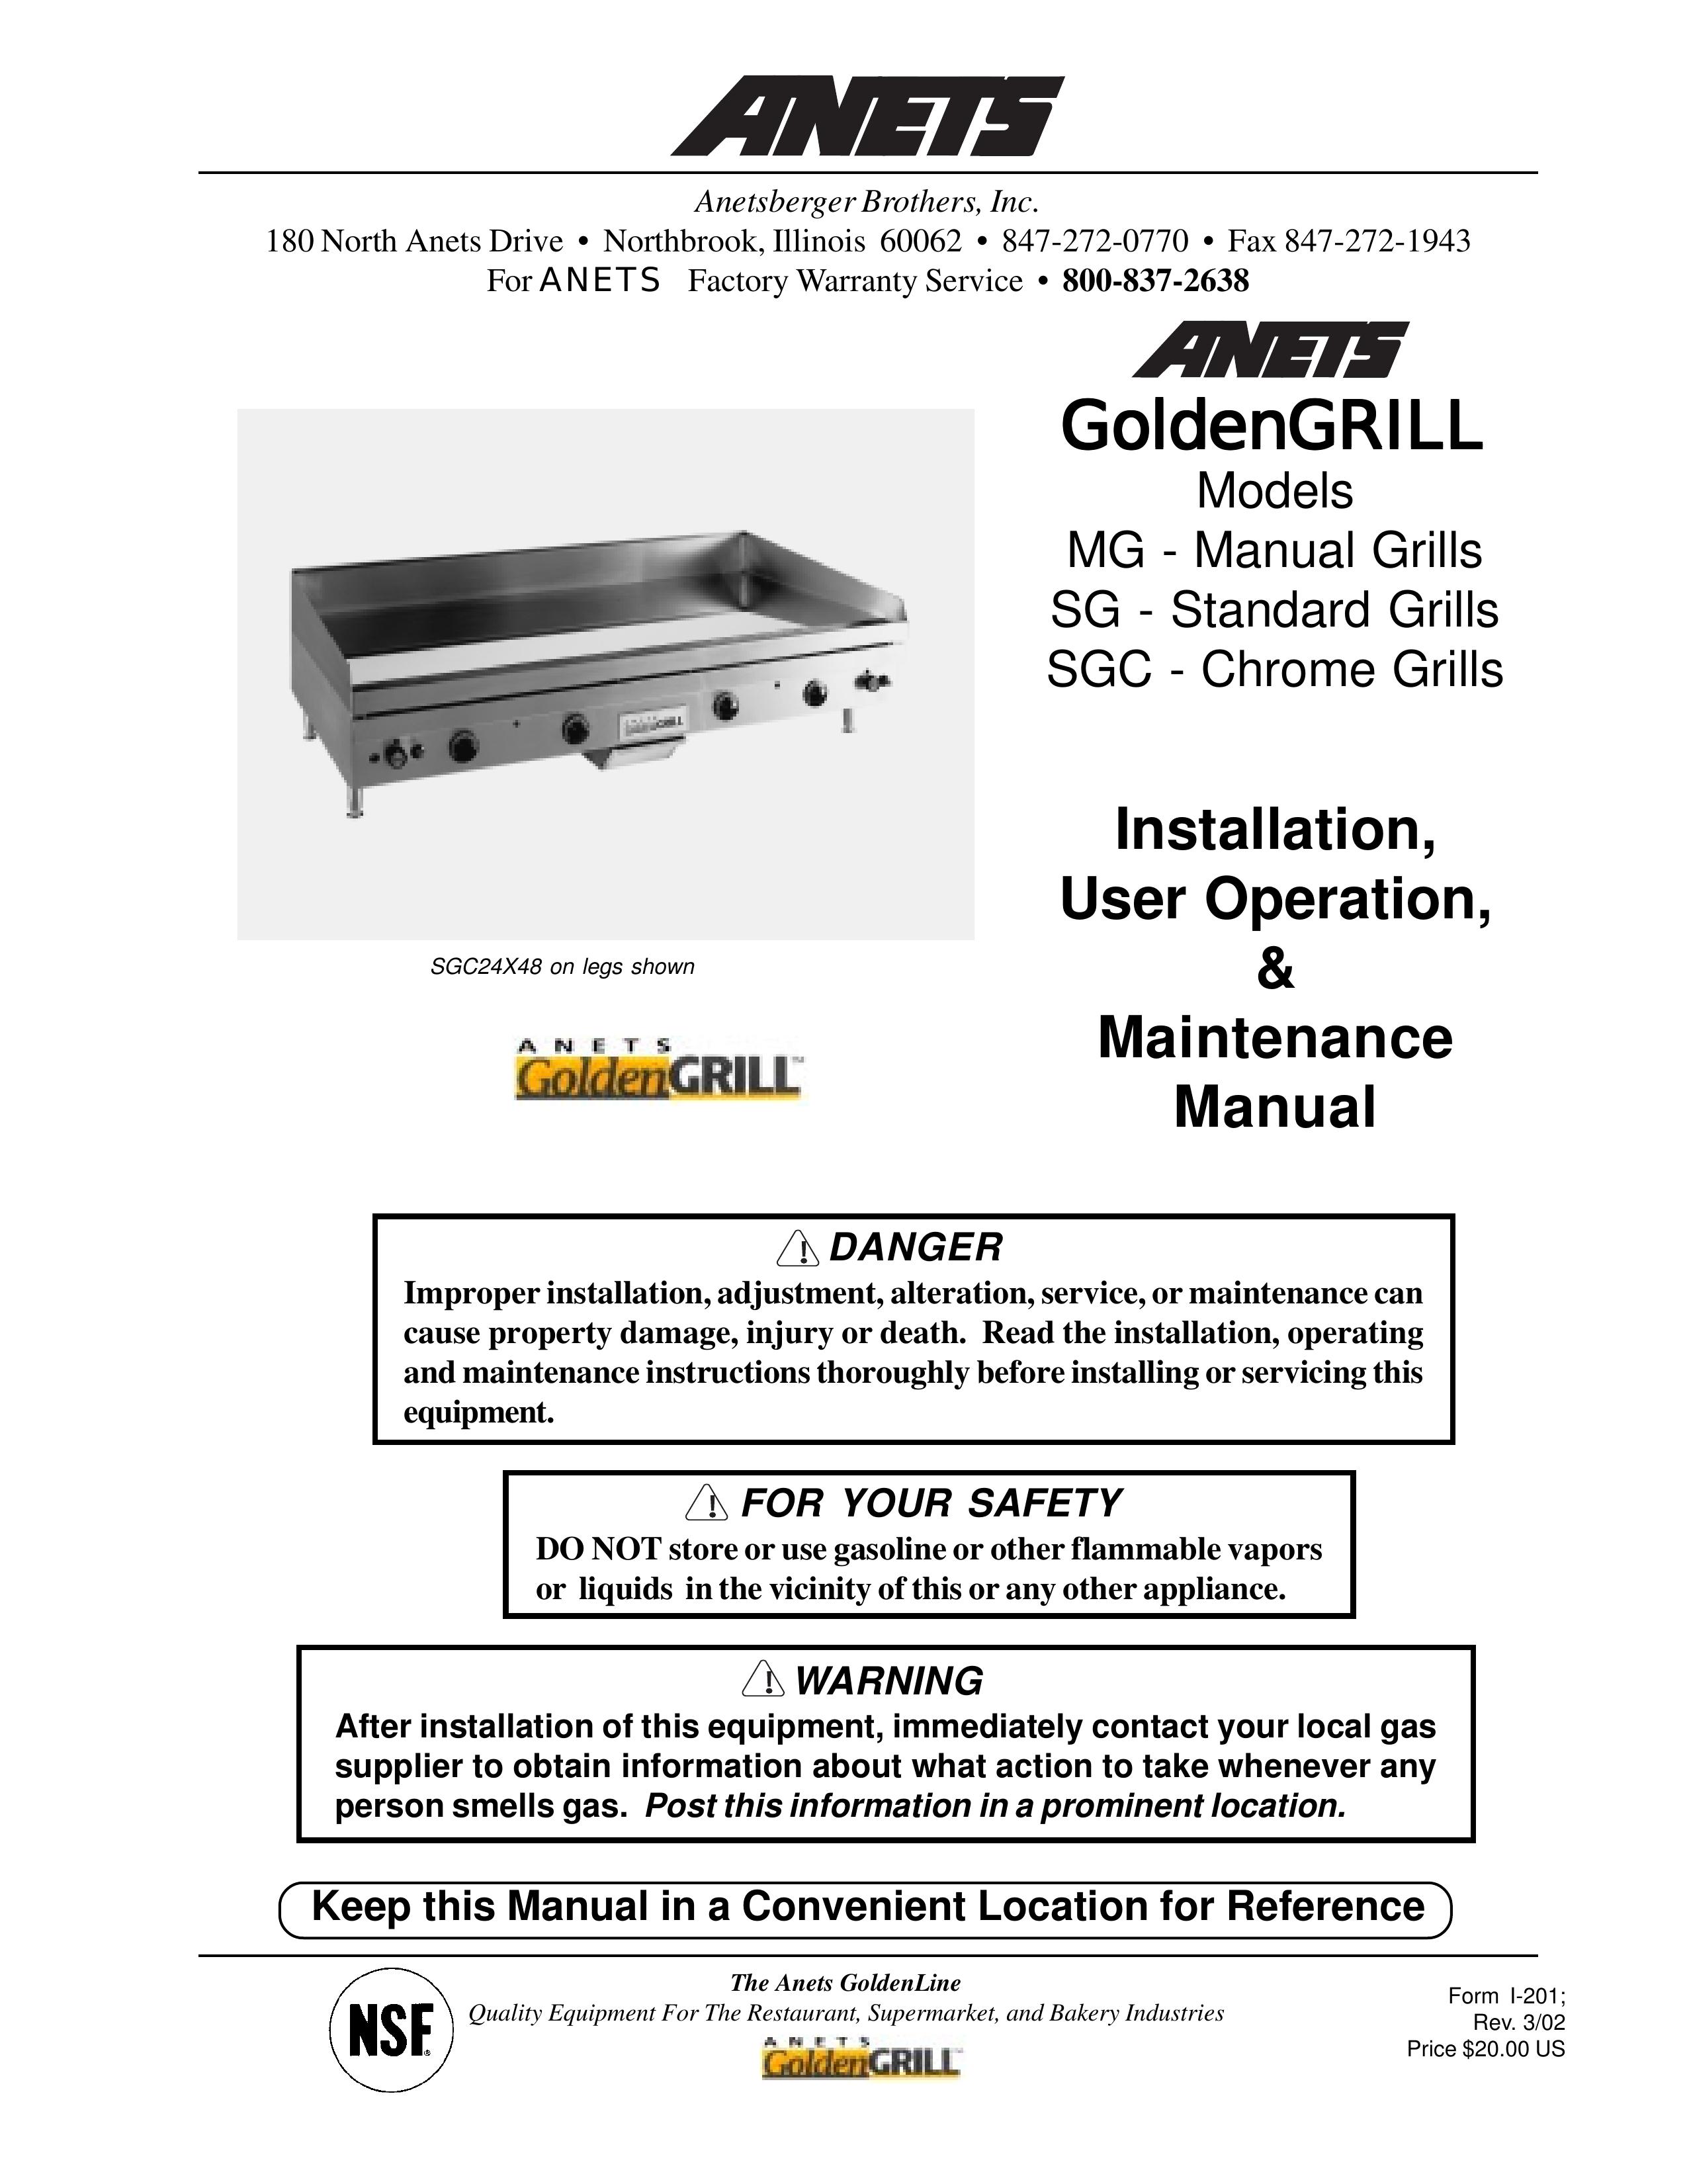 Anetsberger Brothers MG, SG, SGC Gas Grill User Manual